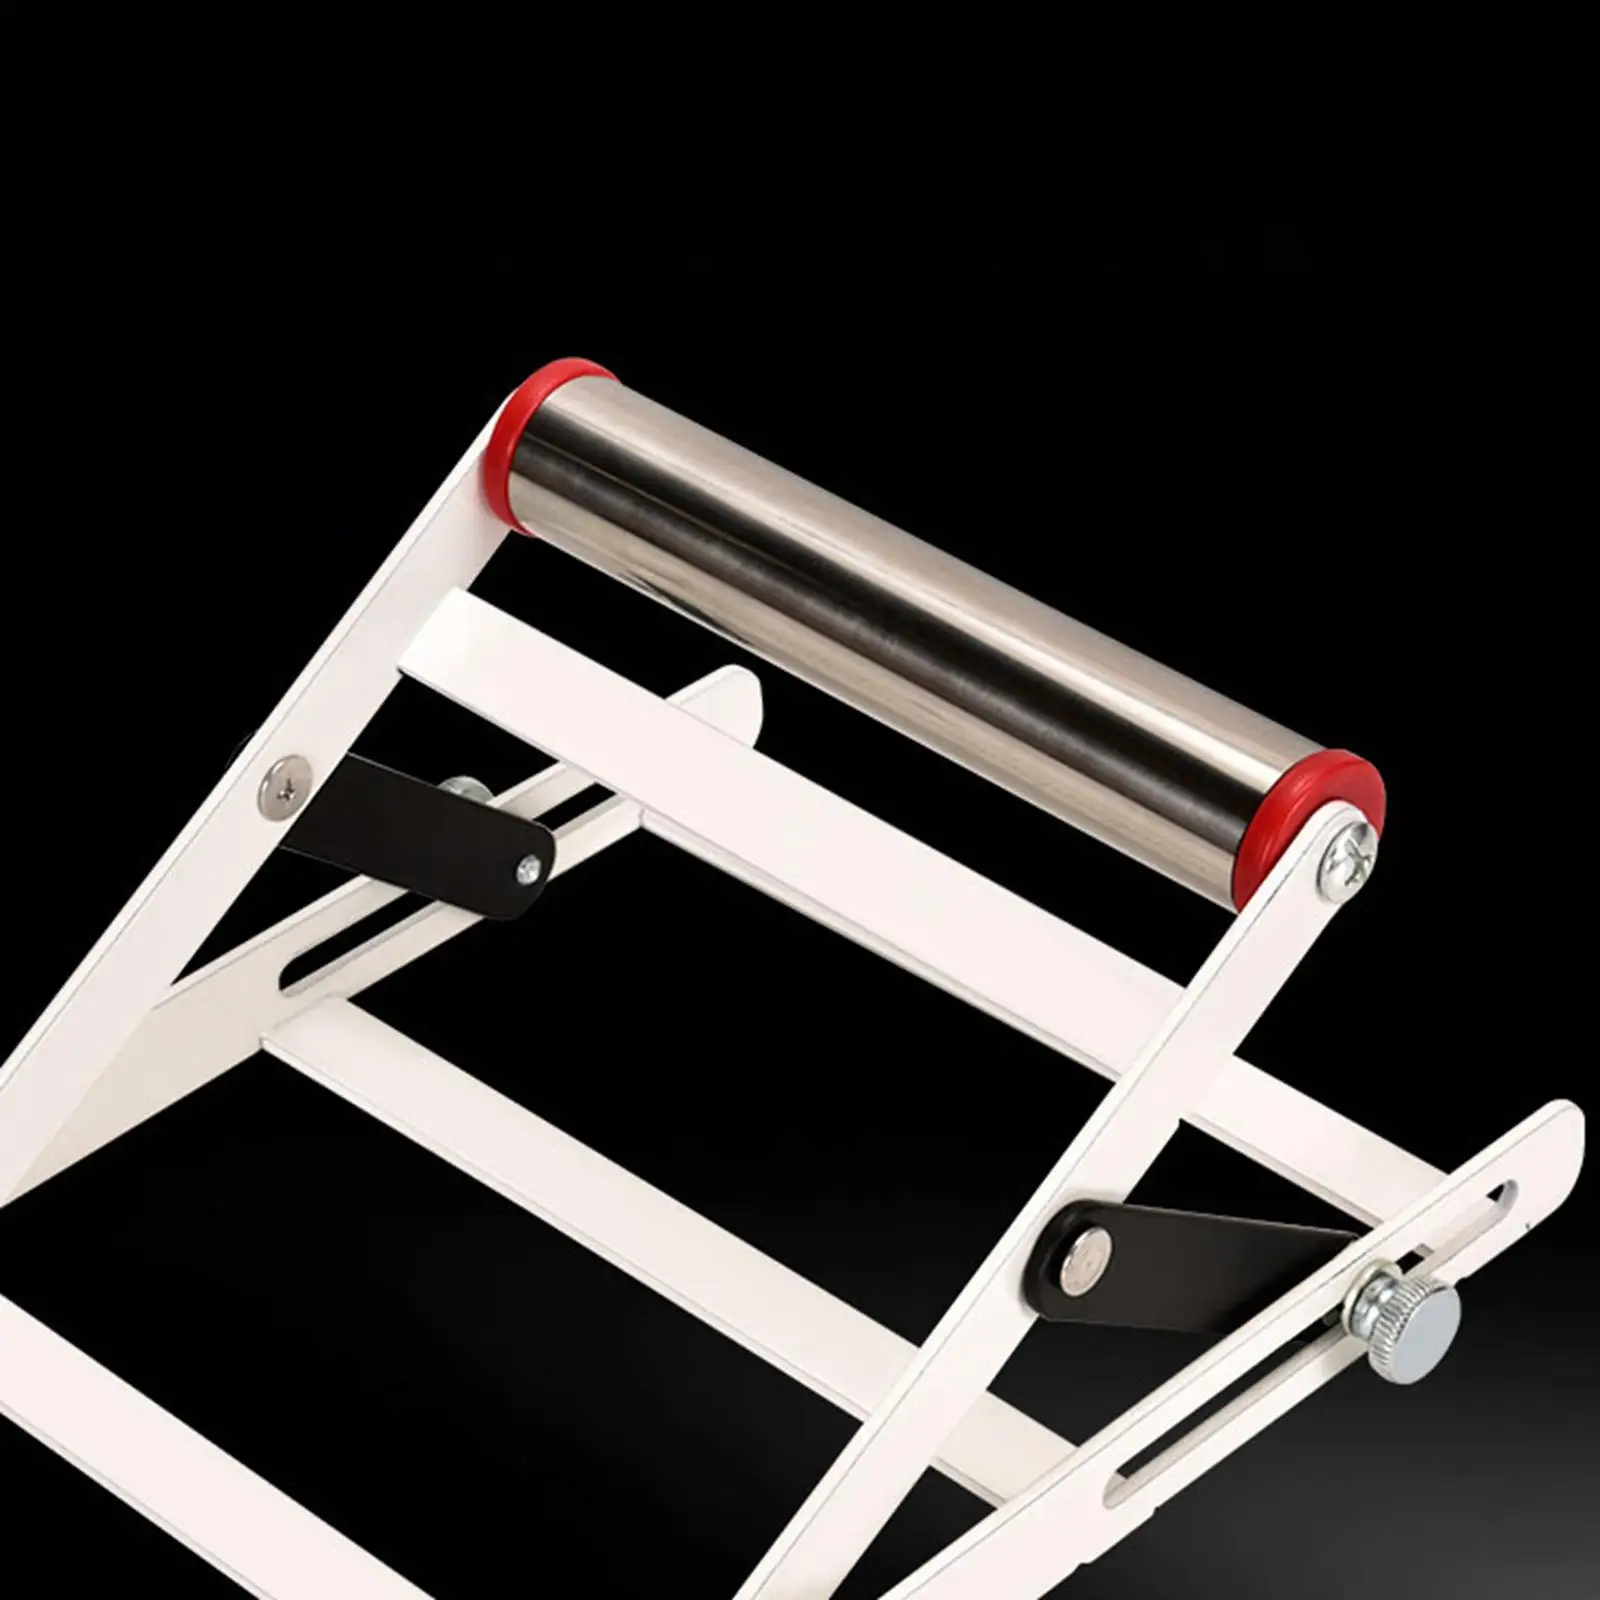 Cutting Machine Support Frame Foldable Portable Durable Adjustable Material Support Frame for Easy to Use Accessory Professional